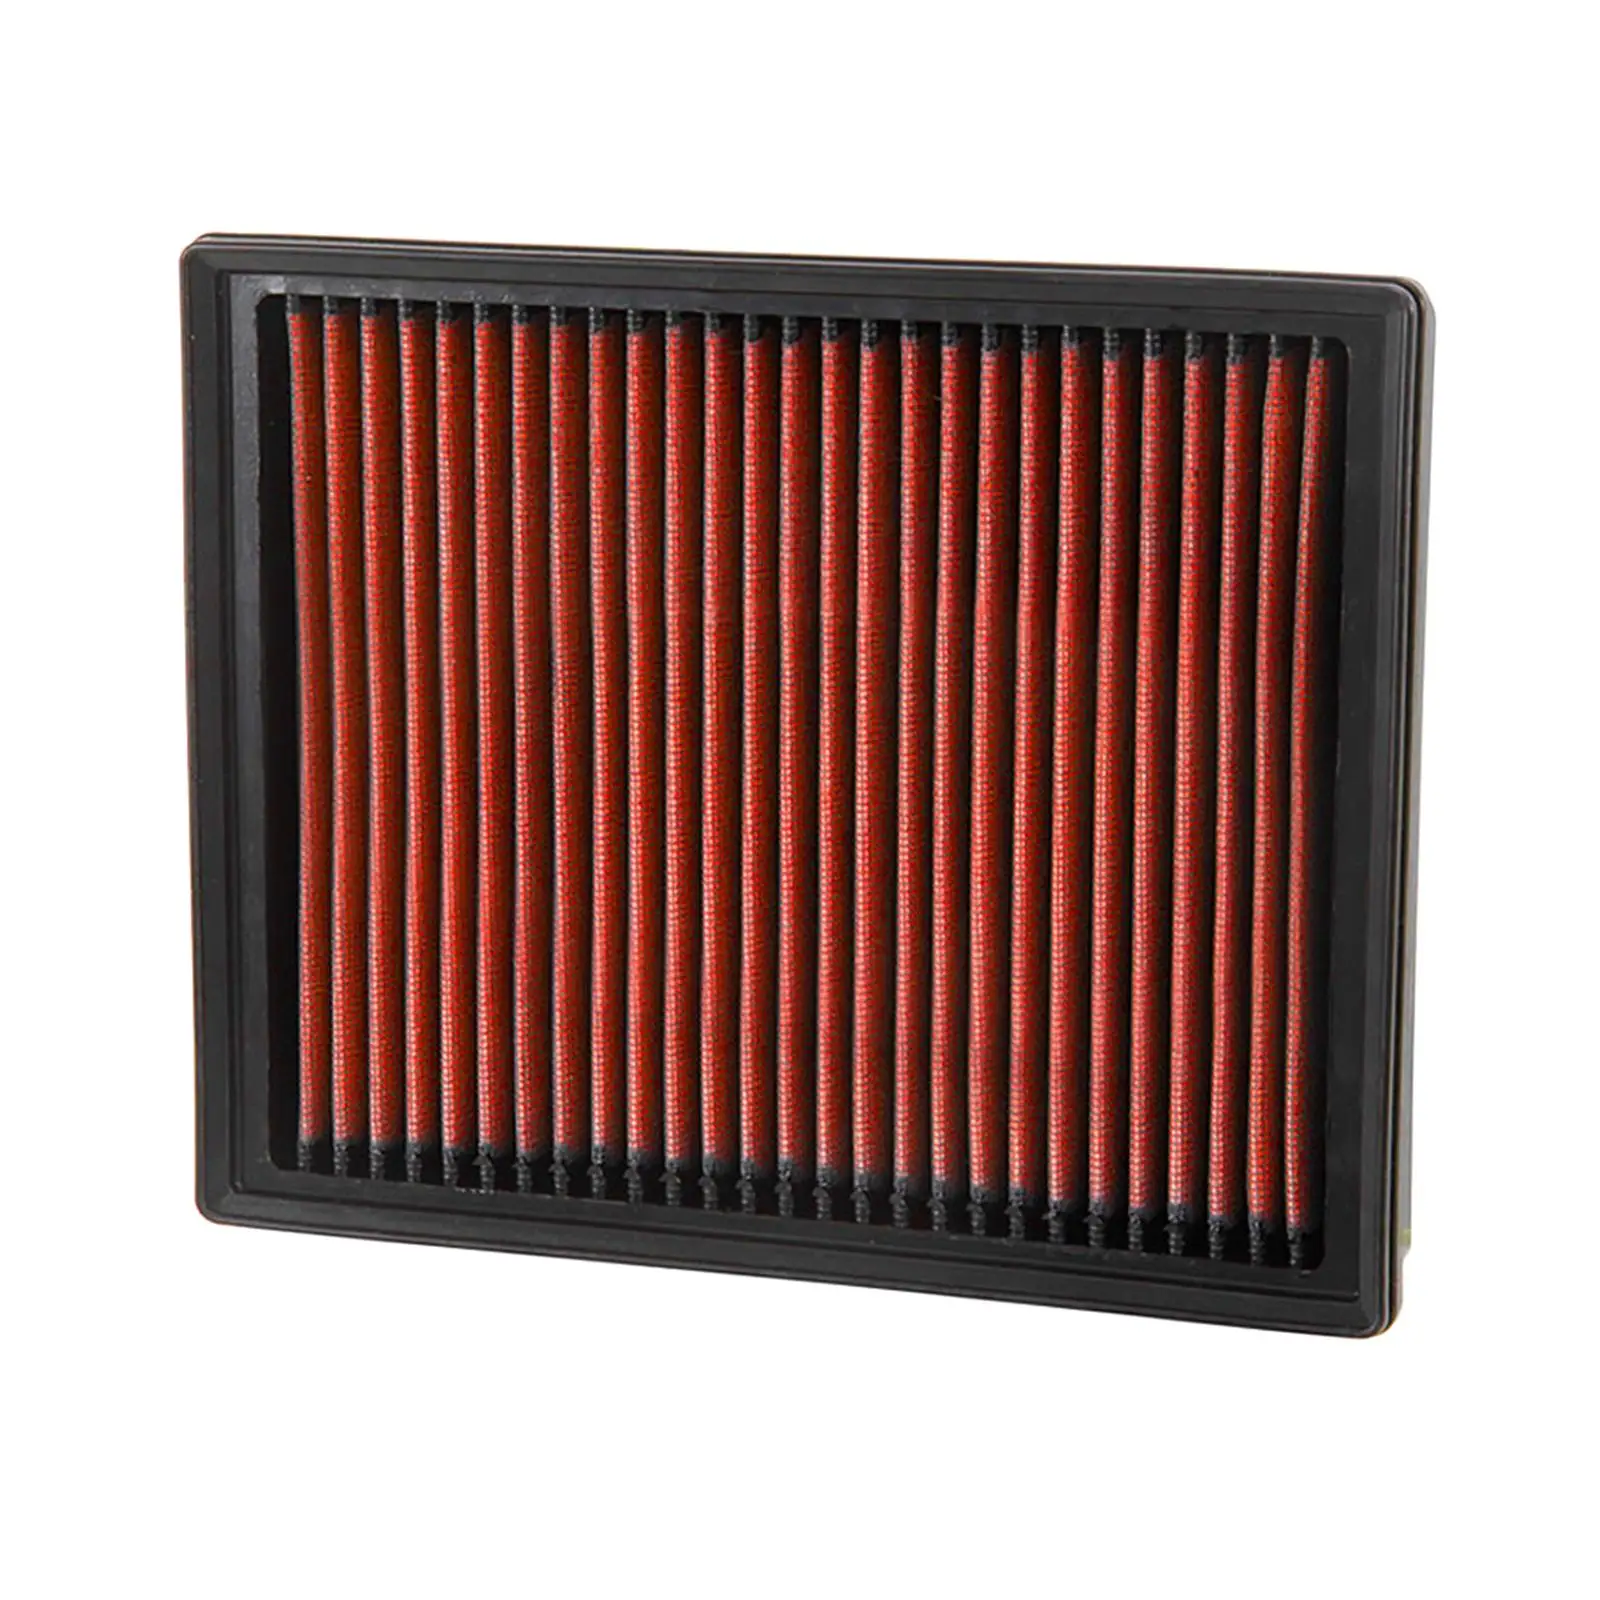 Engine Air Filter High Performance Long Use Interval Low Restriction Fit for Ford Atvs